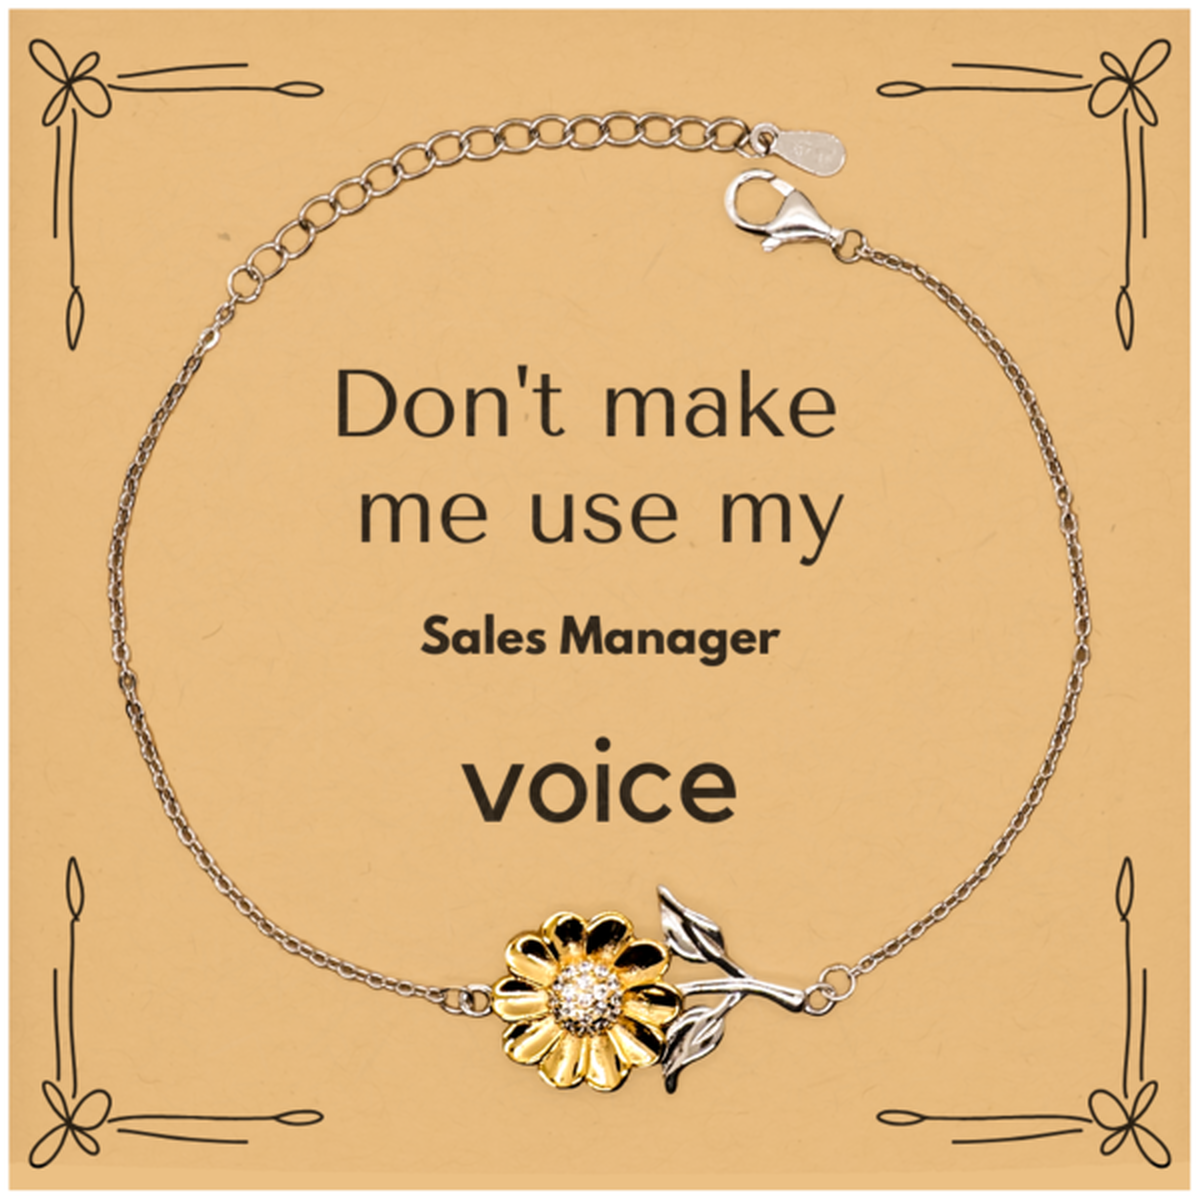 Don't make me use my Sales Manager voice, Sarcasm Sales Manager Card Gifts, Christmas Sales Manager Sunflower Bracelet Birthday Unique Gifts For Sales Manager Coworkers, Men, Women, Colleague, Friends